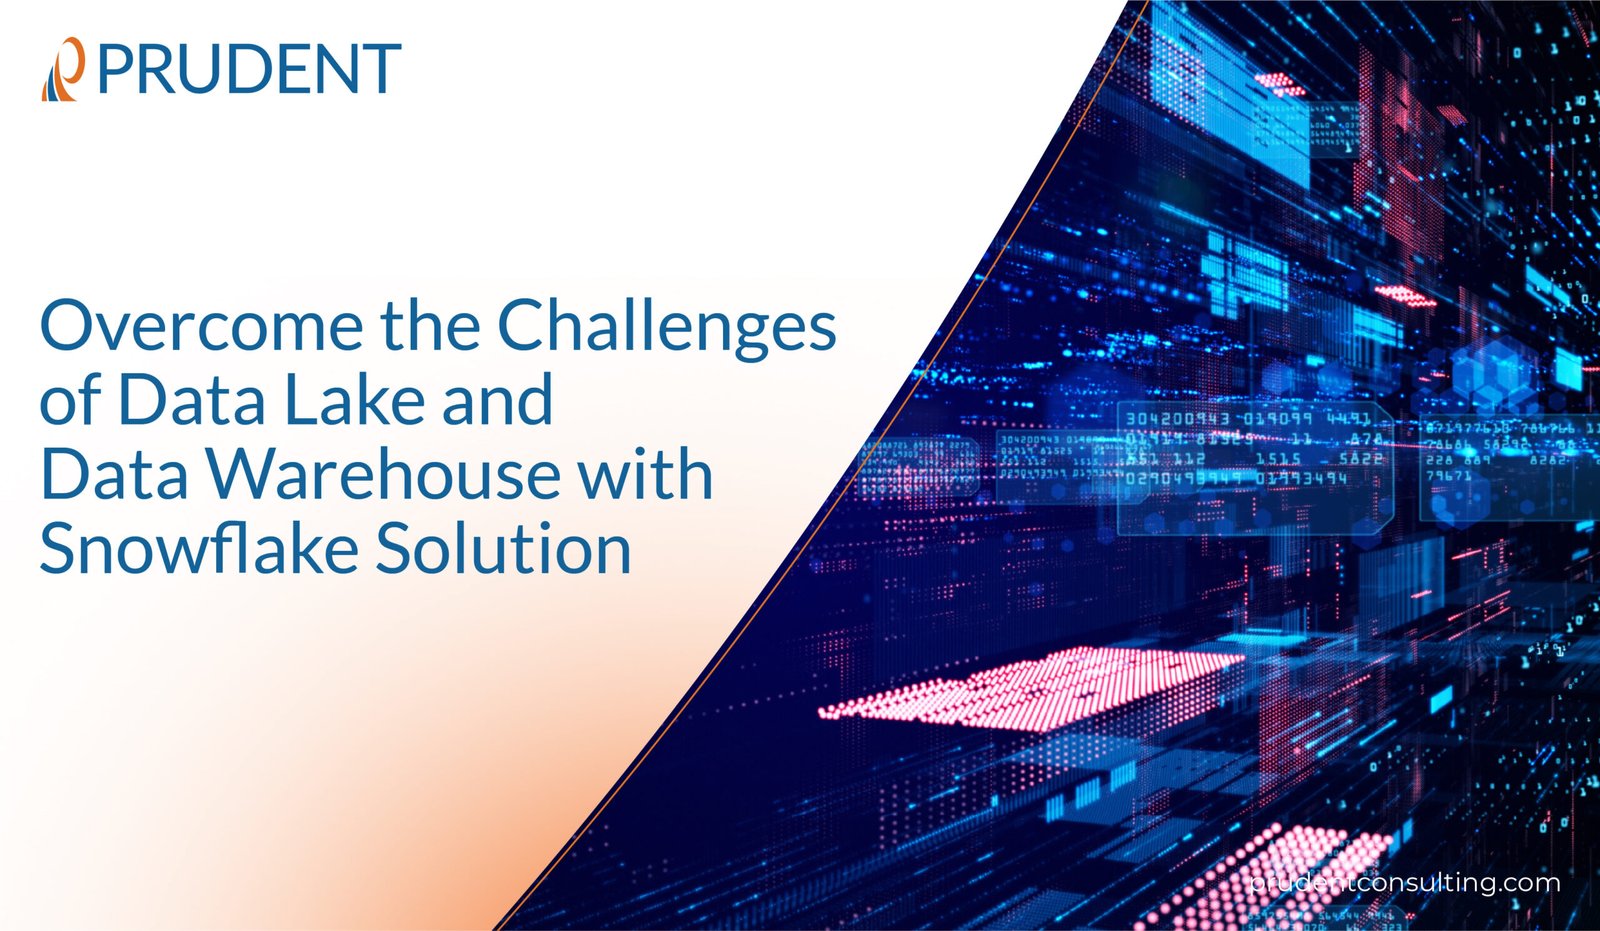 Overcome the Challenges of Data Lake and Data Warehouse with Snowflake Solution